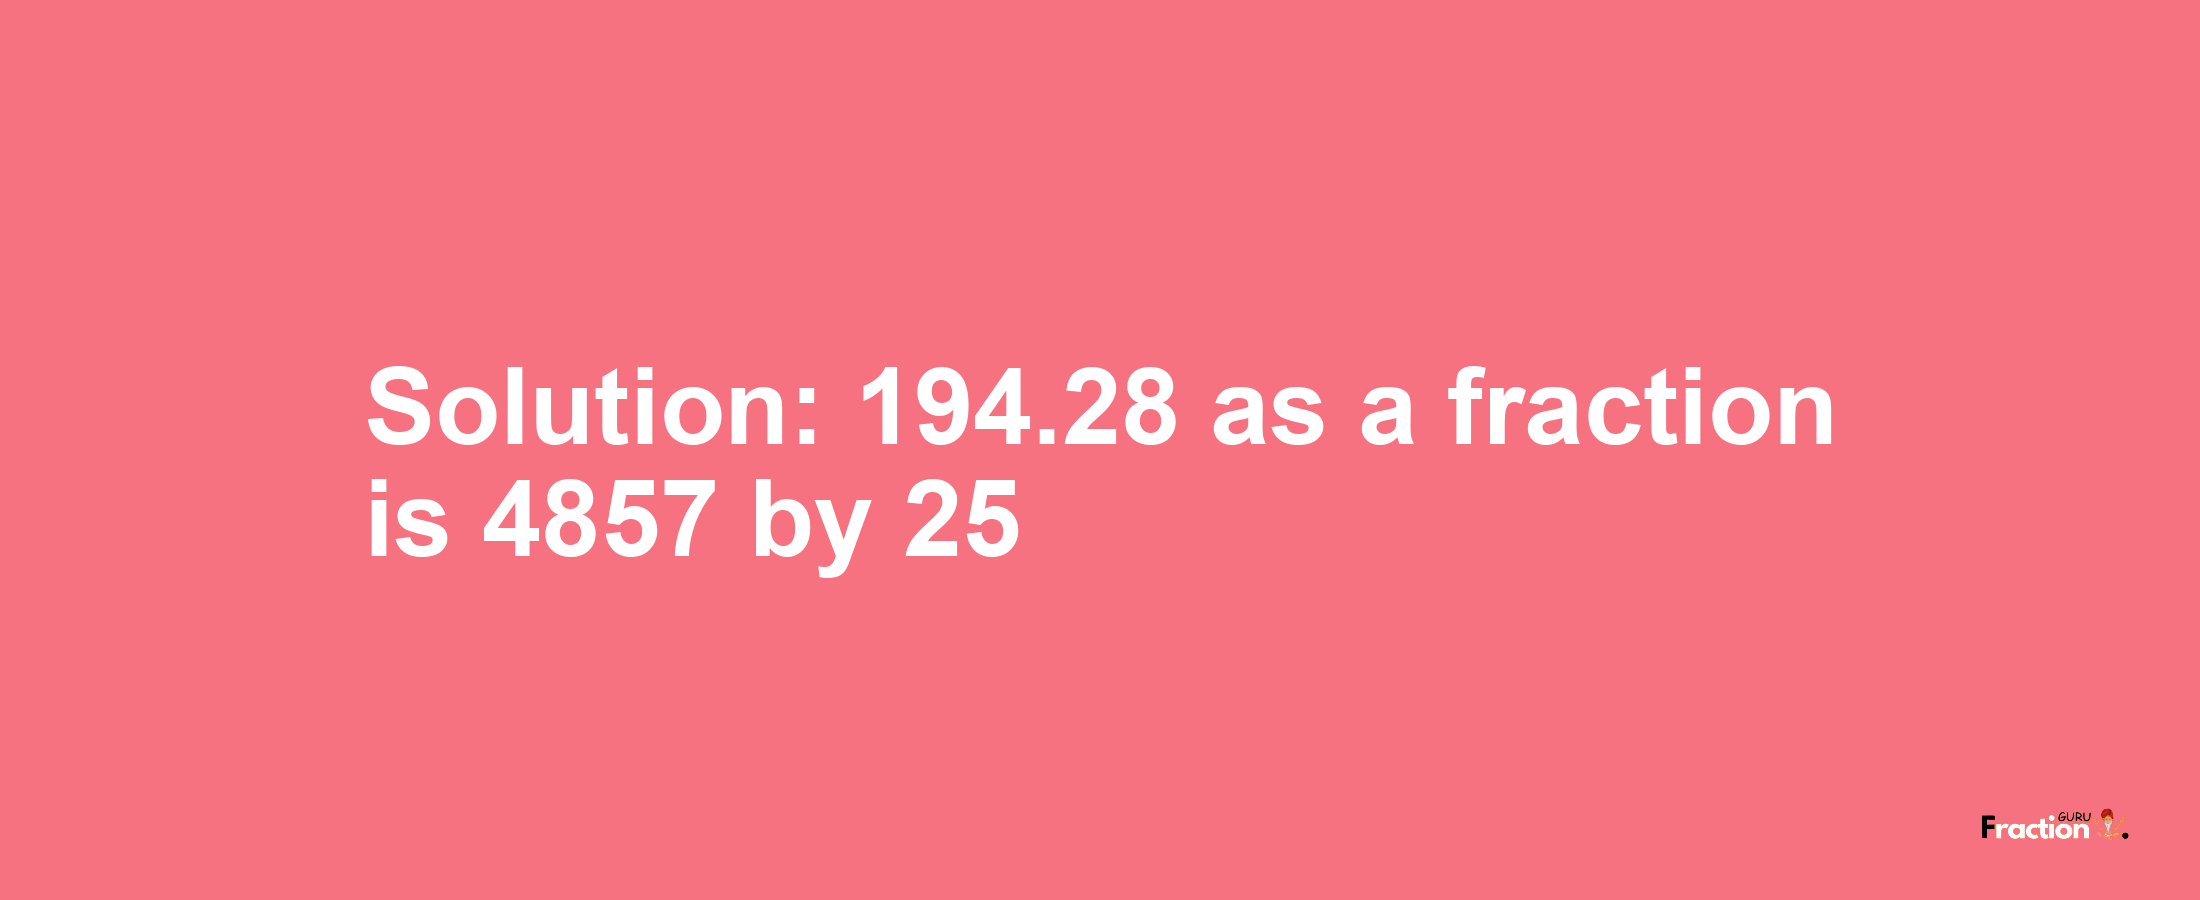 Solution:194.28 as a fraction is 4857/25